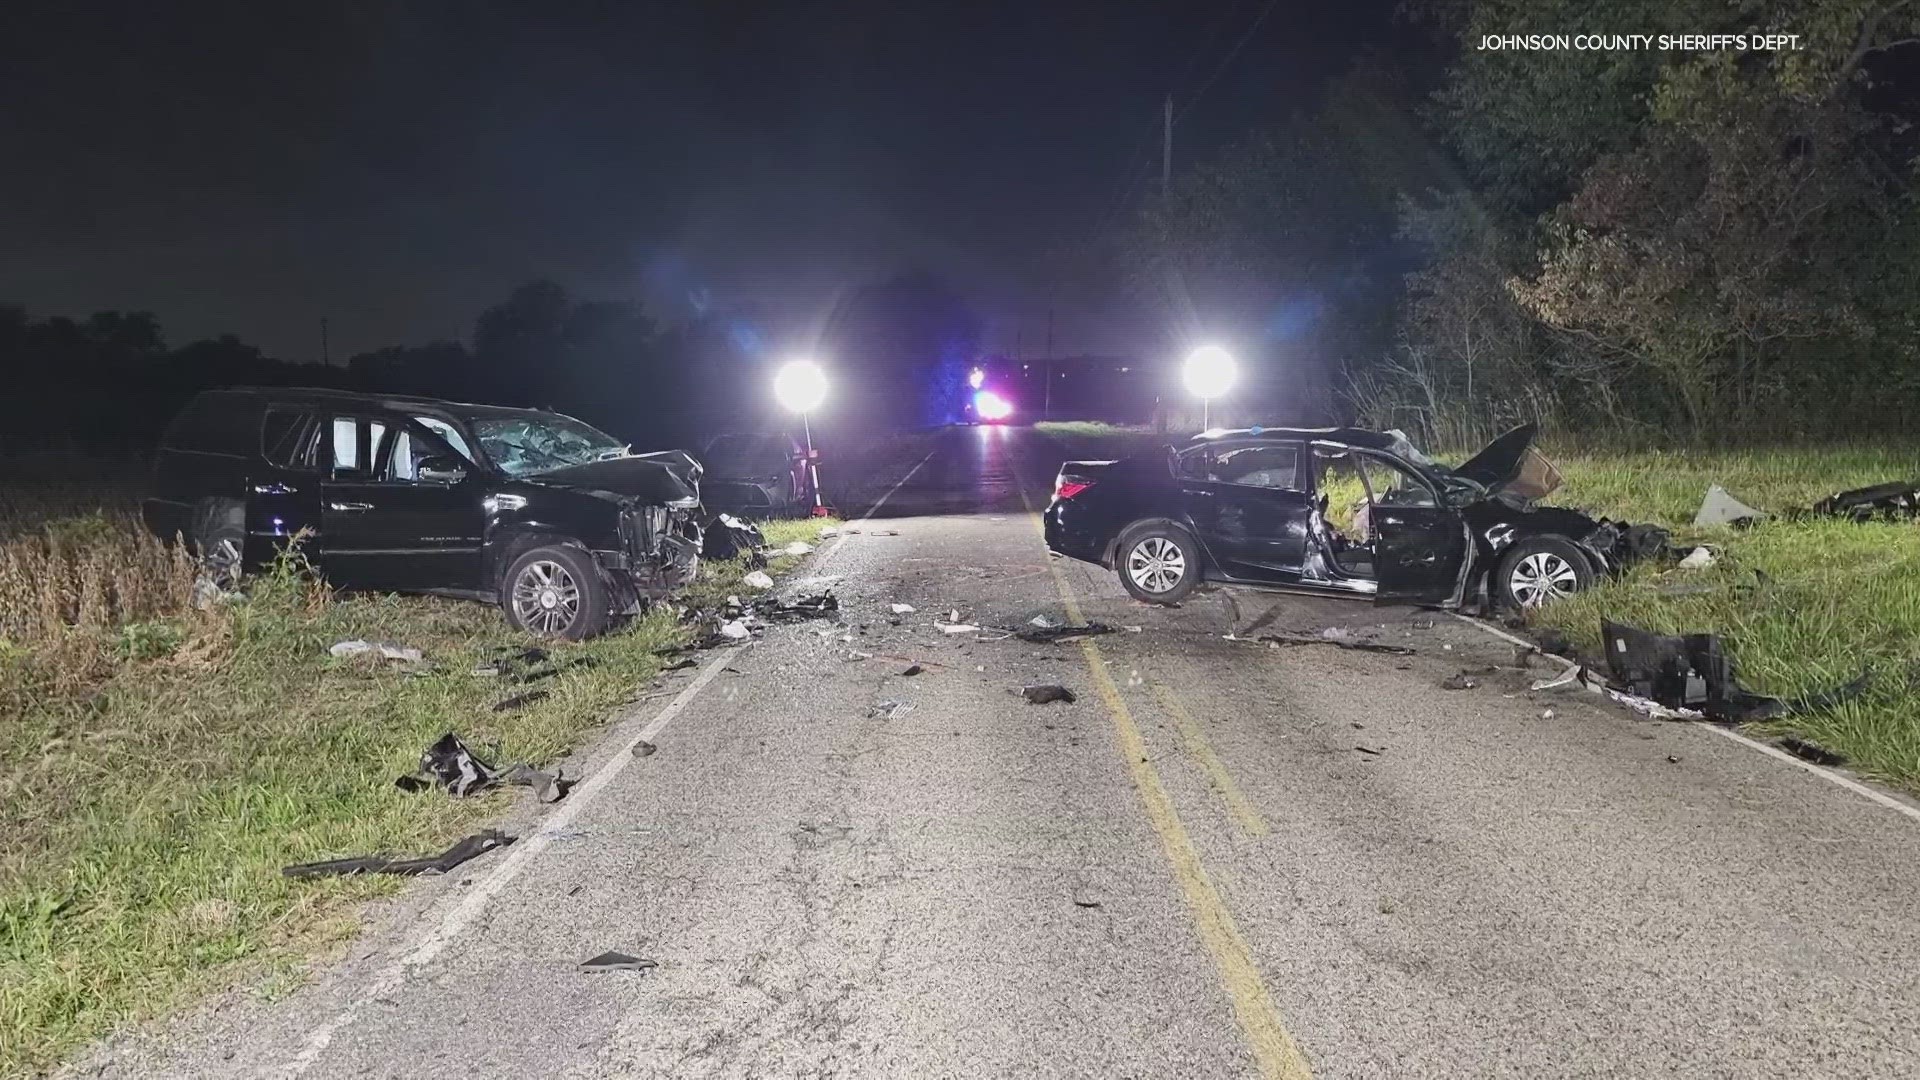 The crash happened around 7 p.m. Thursday in the 700 block of North Five Points Road, just south of County Line Road.